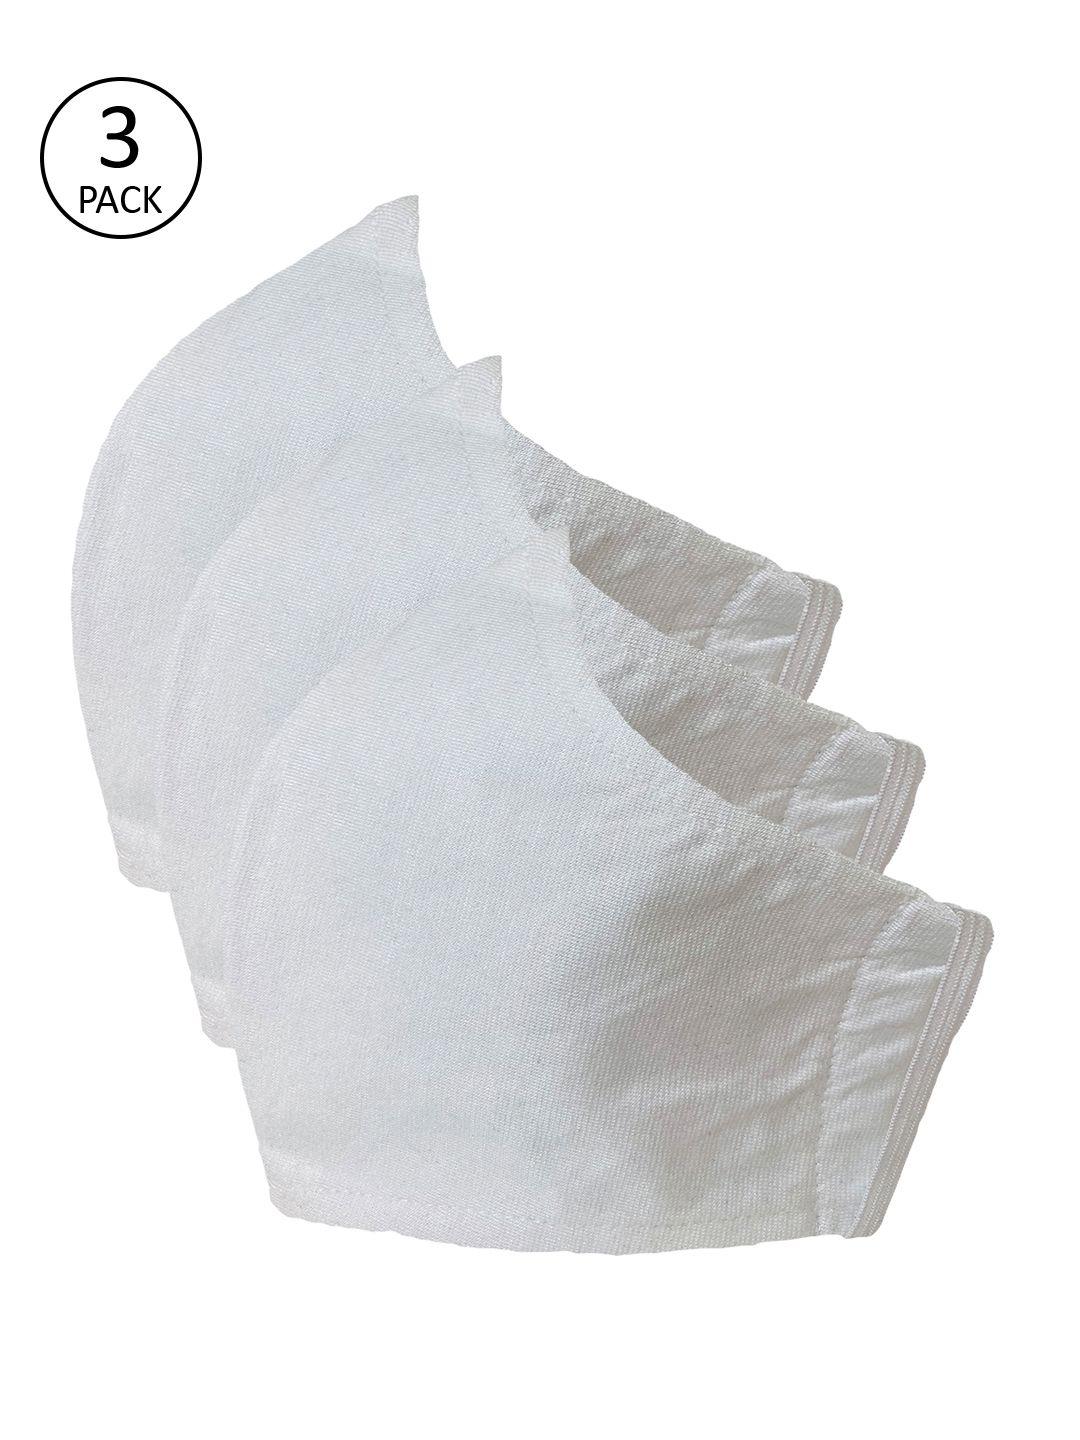 sera adults pack of 3 solid 3-ply reusable cloth masks